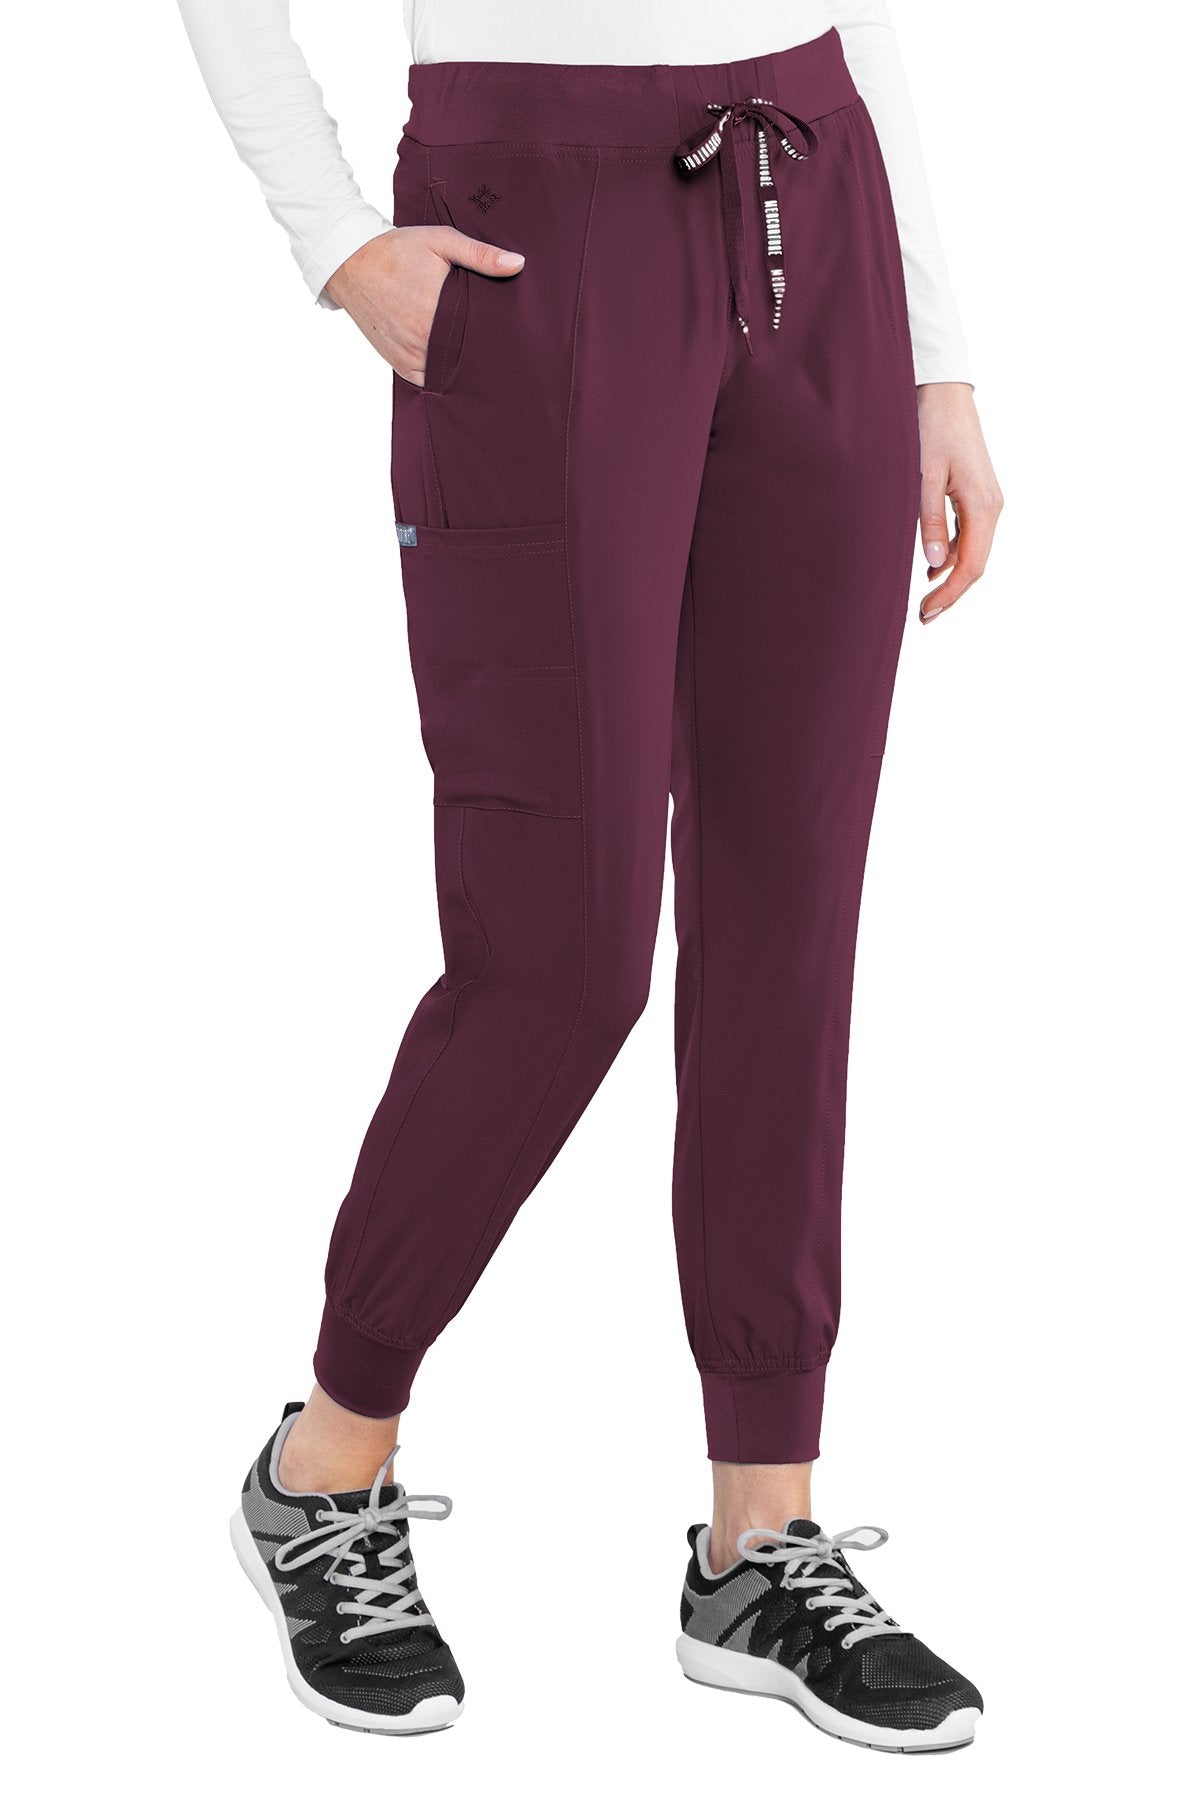 Med Couture 8721 SEAMED JOGGER